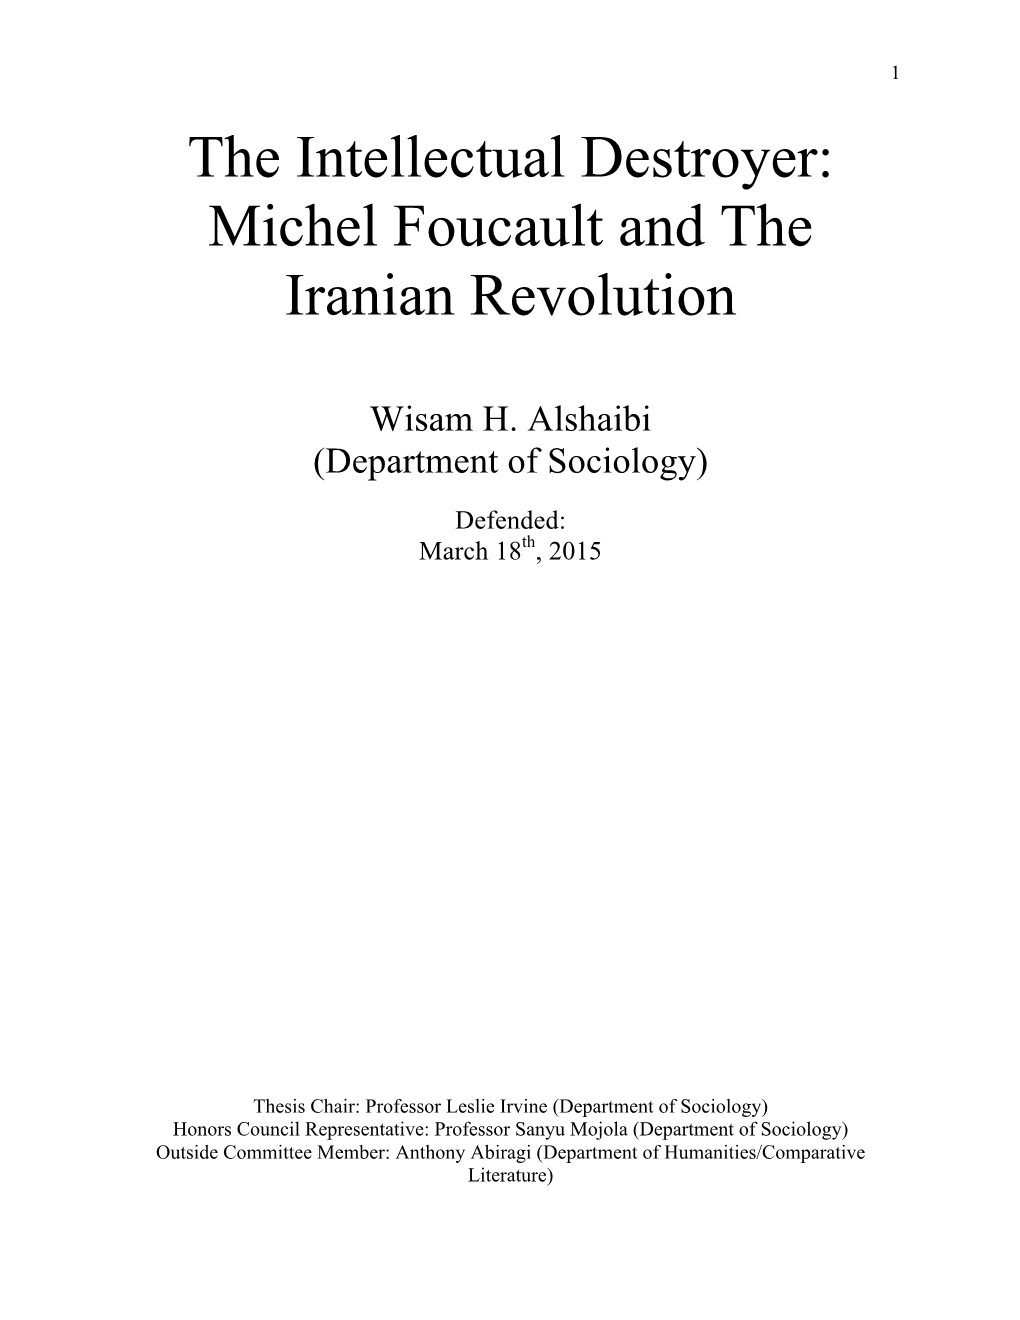 The Intellectual Destroyer: Michel Foucault and the Iranian Revolution